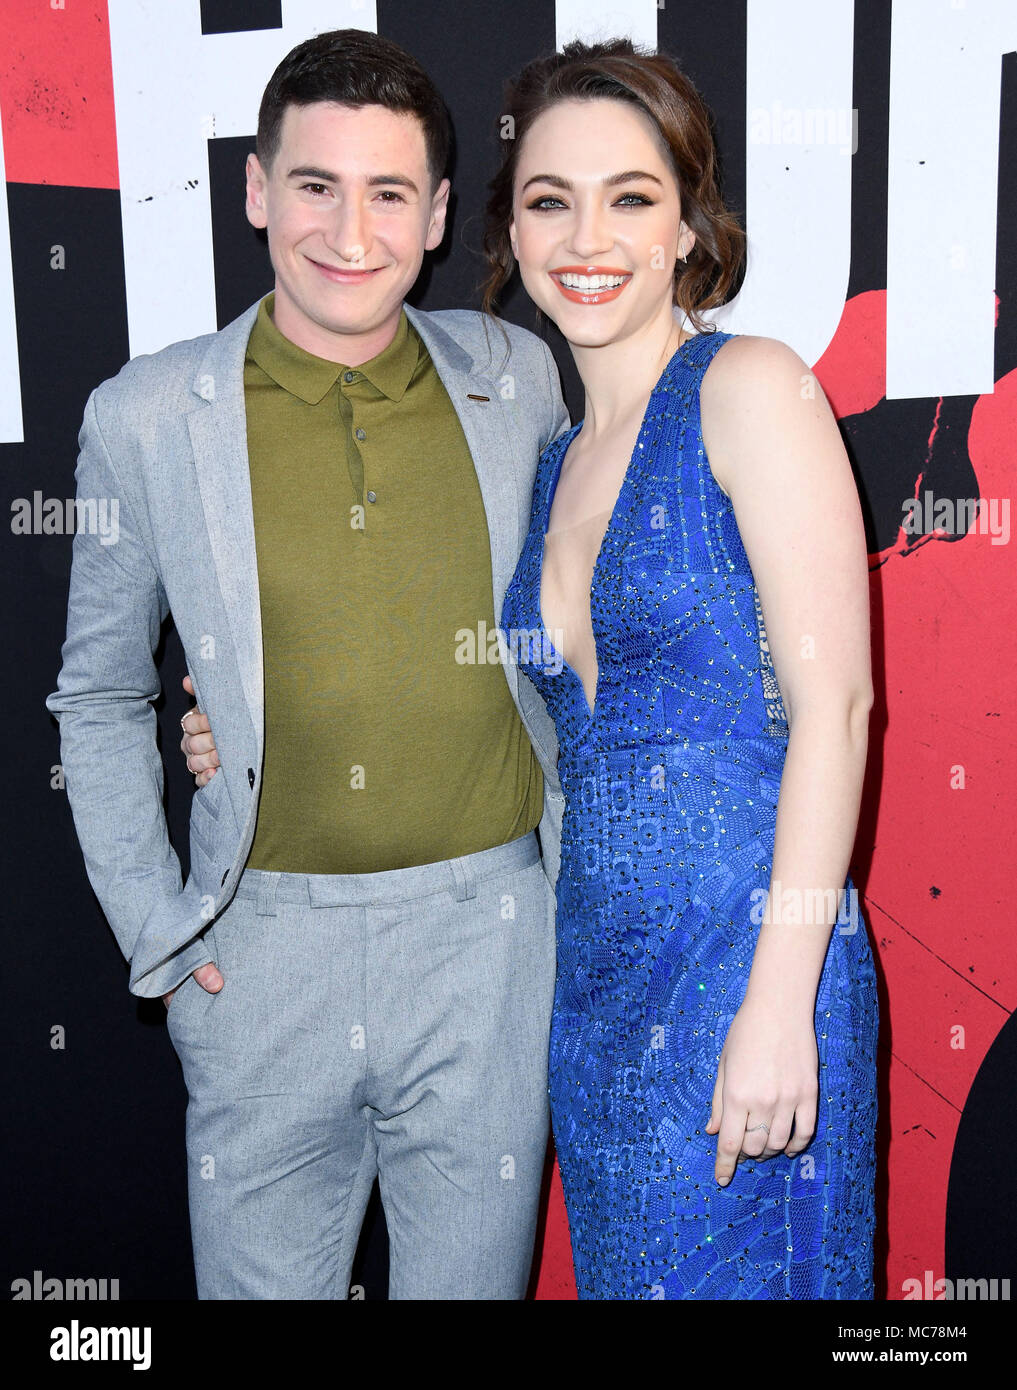 Hollywood, California, USA. 12th Apr, 2018. SAM LERNER and VIOLETT BEANE at the 'Truth or Dare' Los Angeles Premiere held at Arclight Hollywood. Credit: Birdie Thompson/AdMedia/ZUMA Wire/Alamy Live News Stock Photo